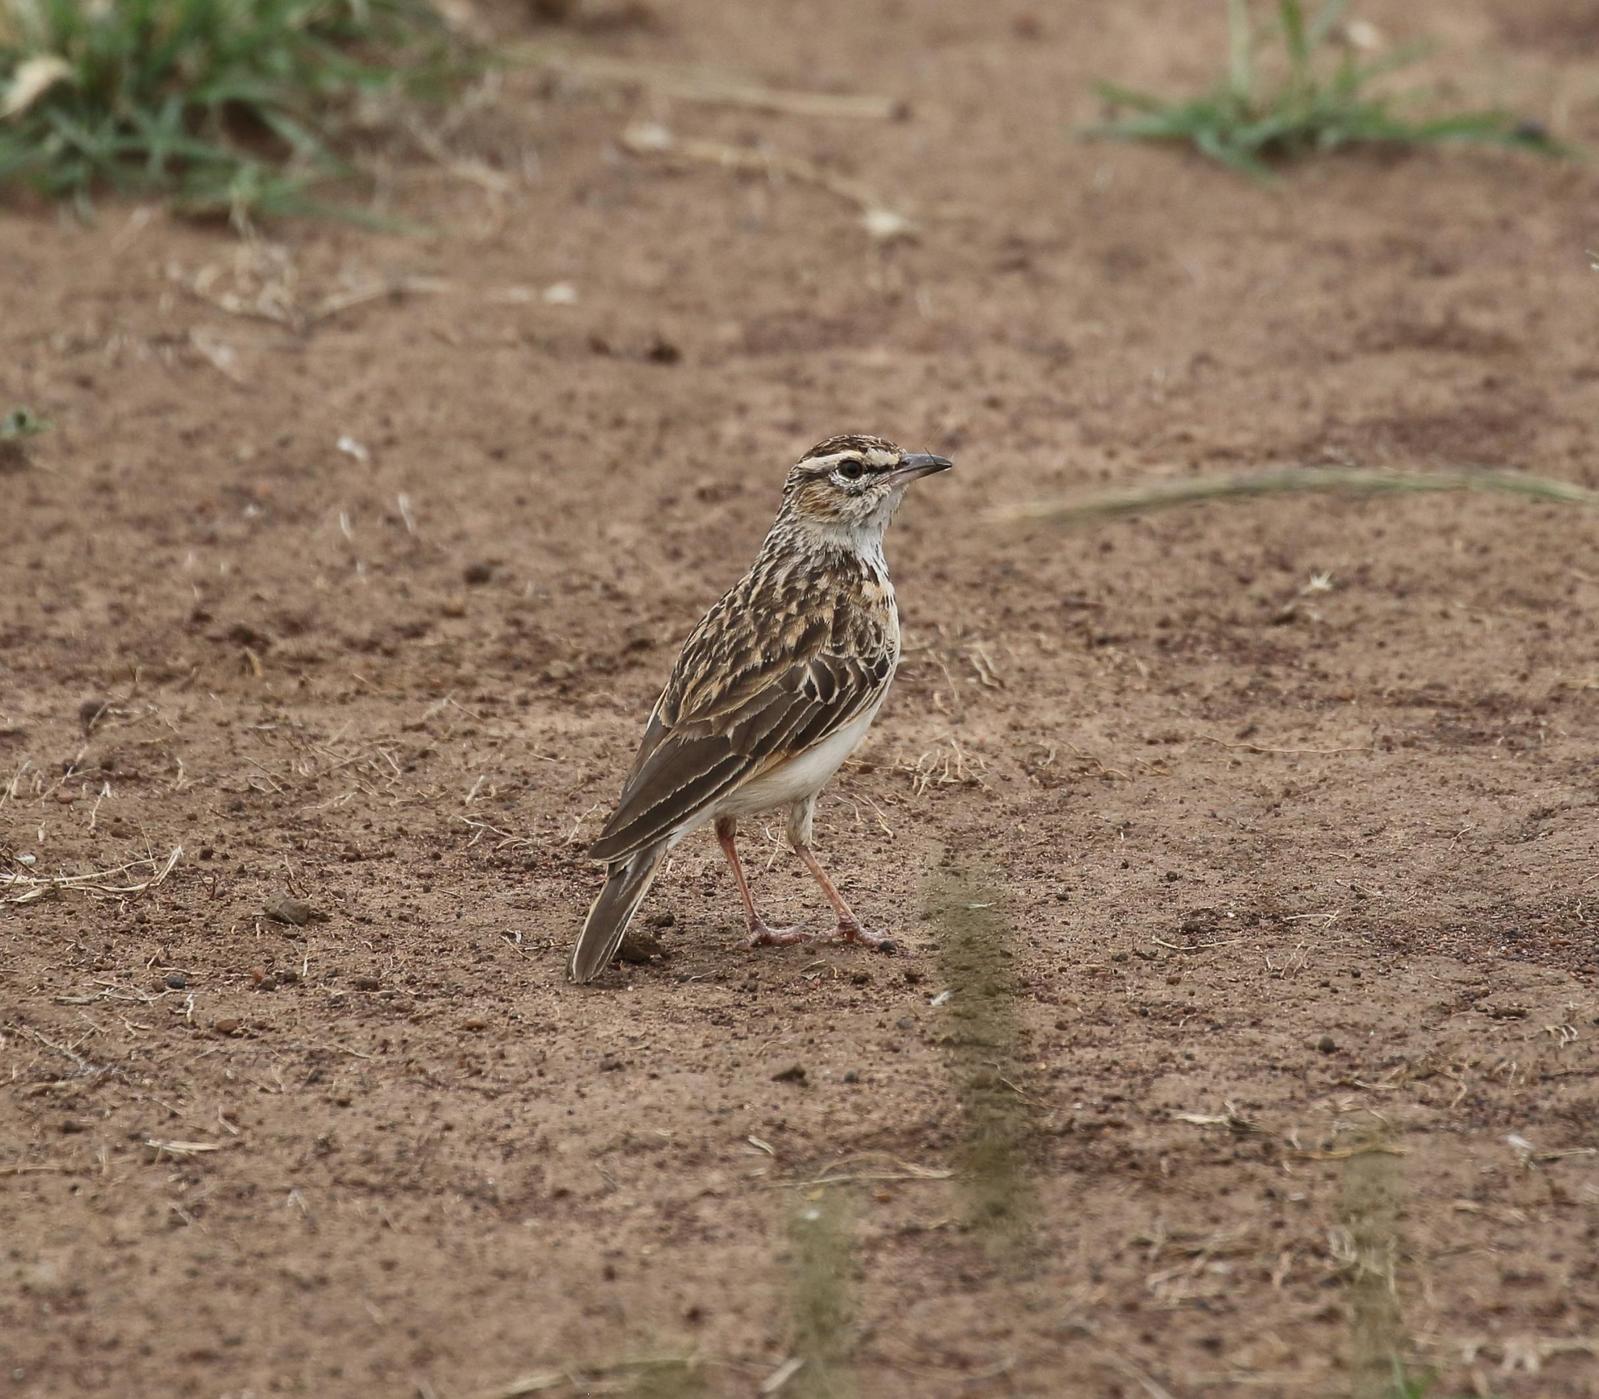 Fawn-colored Lark Photo by Nate Dias